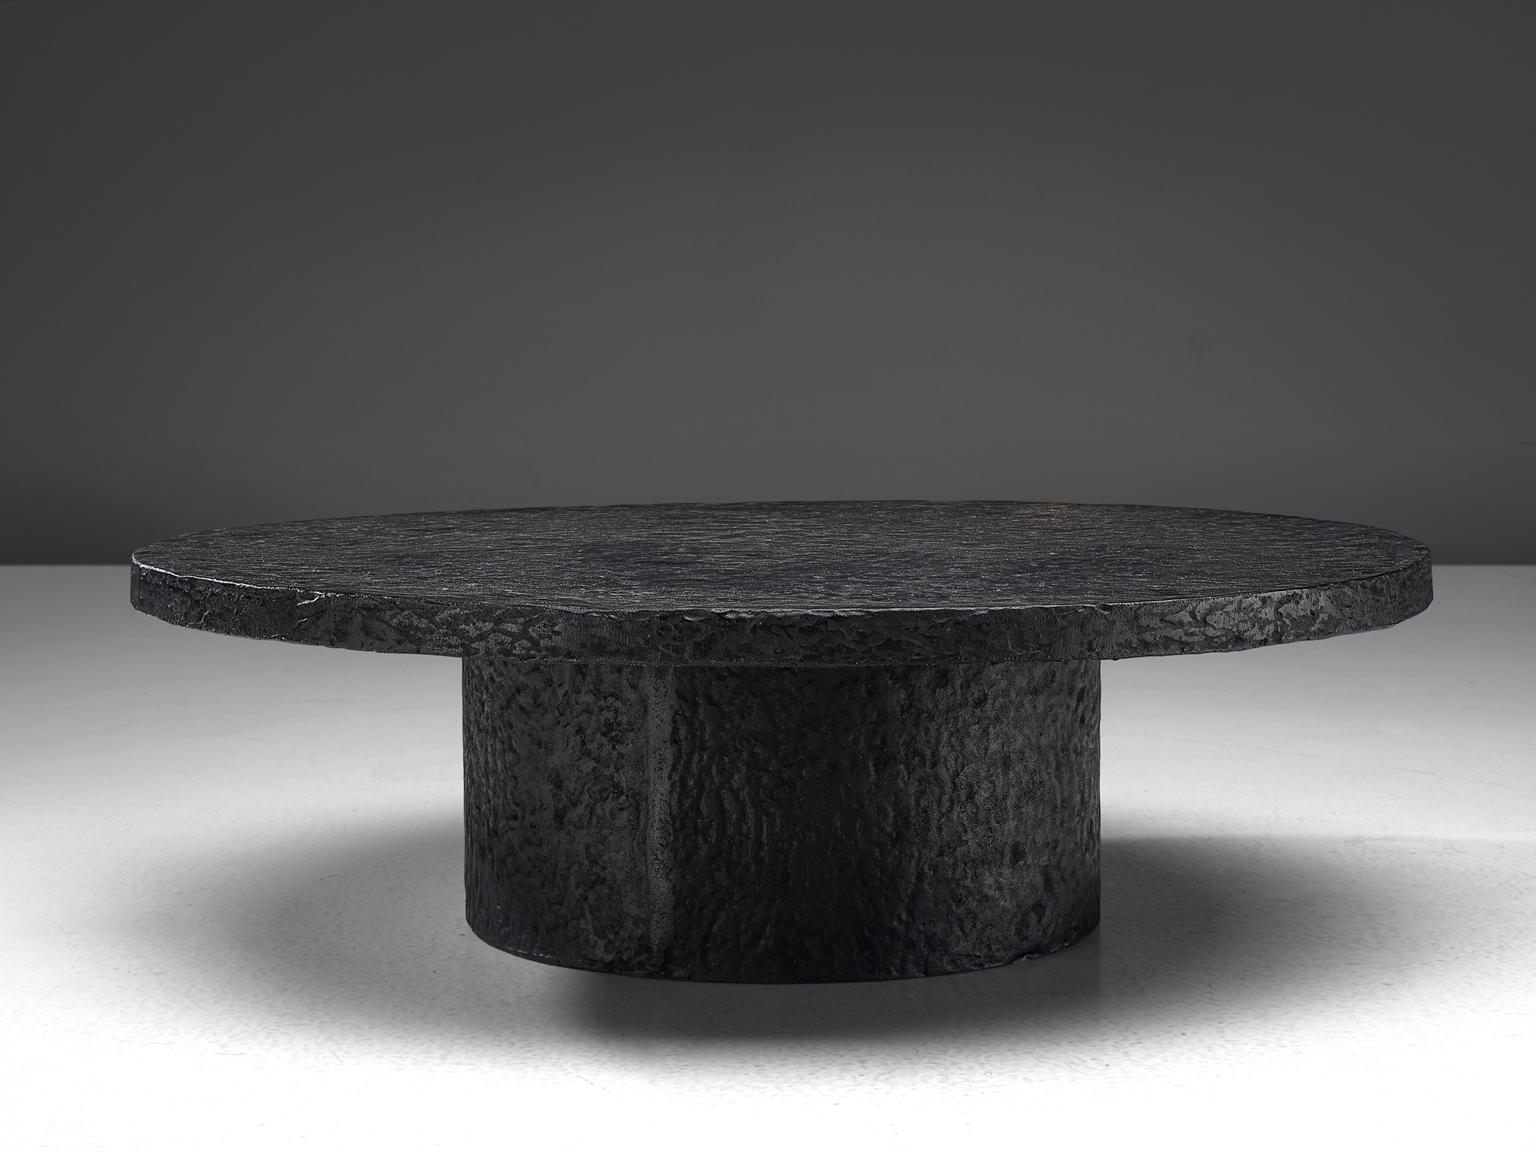 Cocktail table, resin, stone Northern-Europe, 1970s. 

This deep black to brown robust coffee or cocktail table is from the 1970s. The thick round top is supported by a similar but smaller round column. This low table is made out of resin which